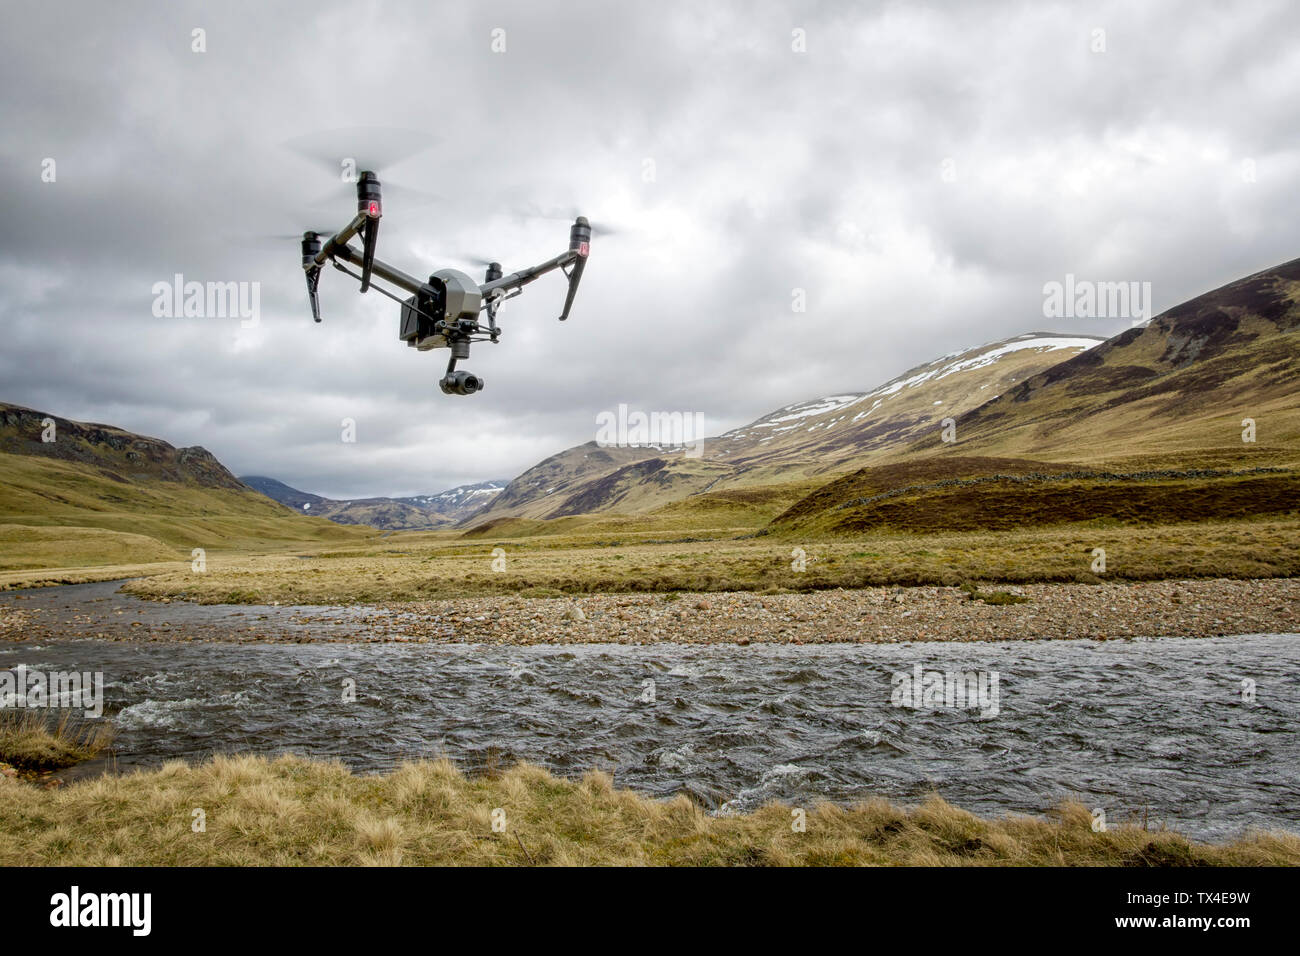 United Kingdom, Scottland, drone flying over river Stock Photo